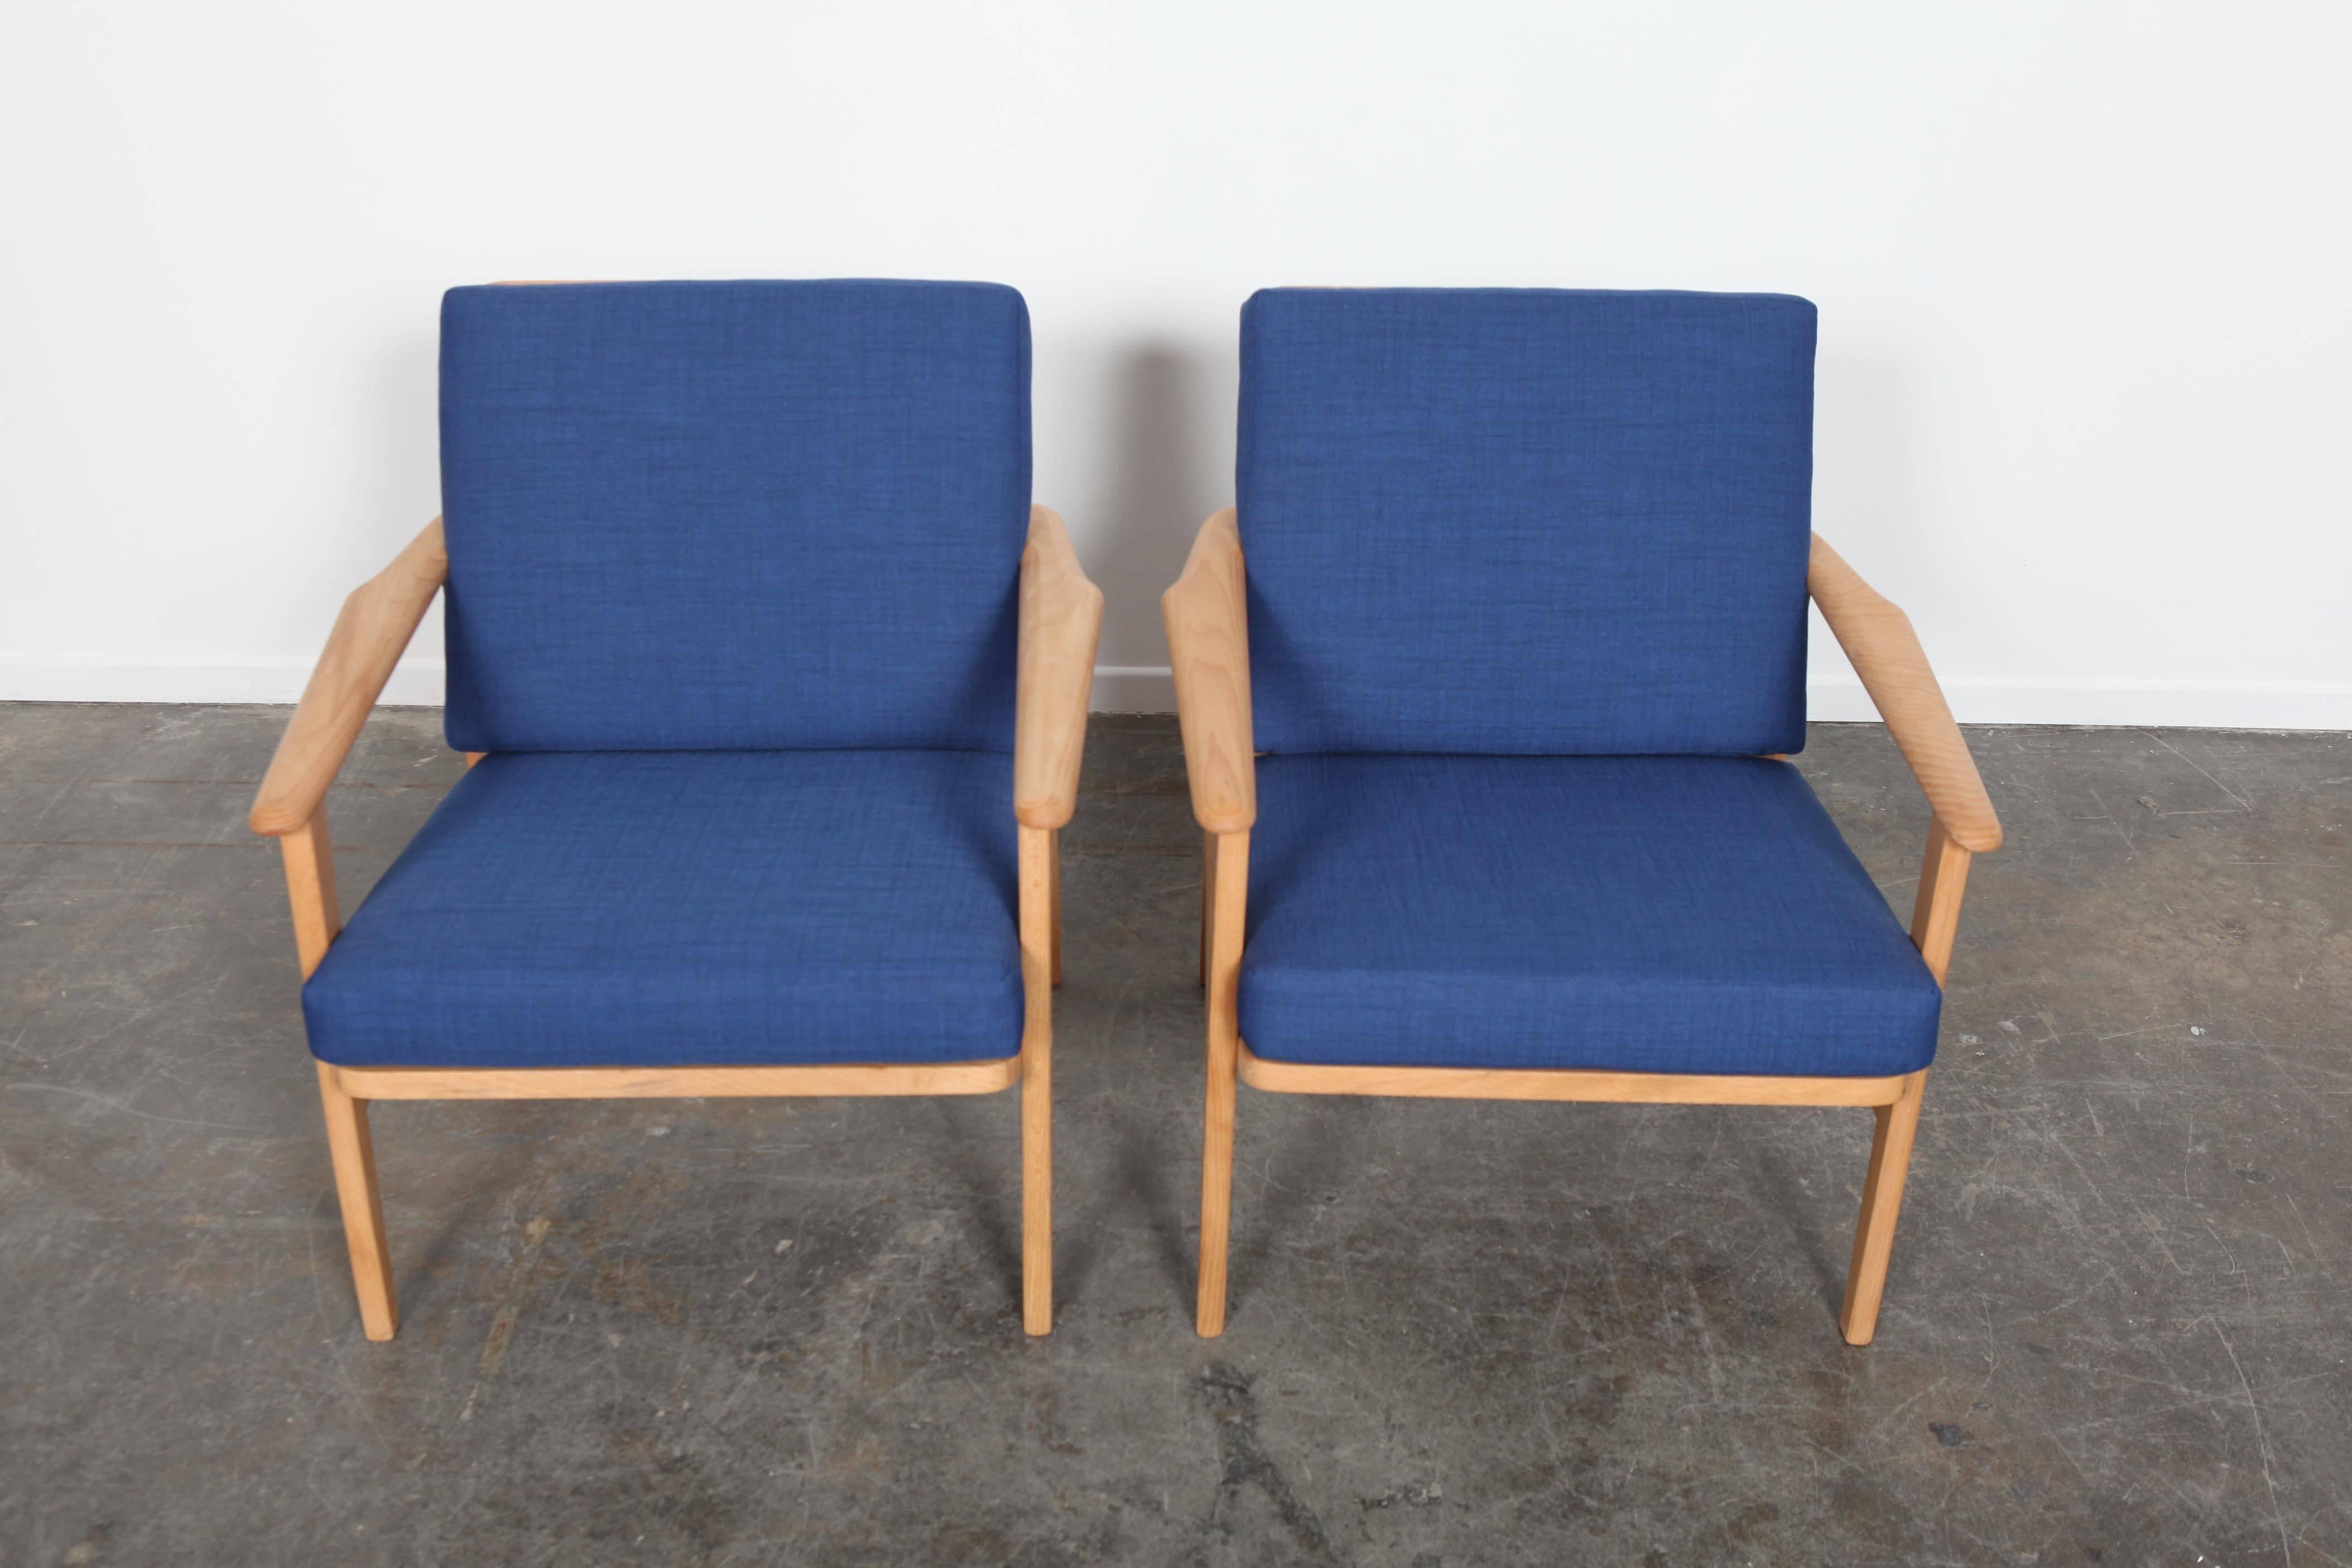 Pair of Classic Mid-Century Modern low back all wood lounge chairs. Newly refinished and reupholstered.